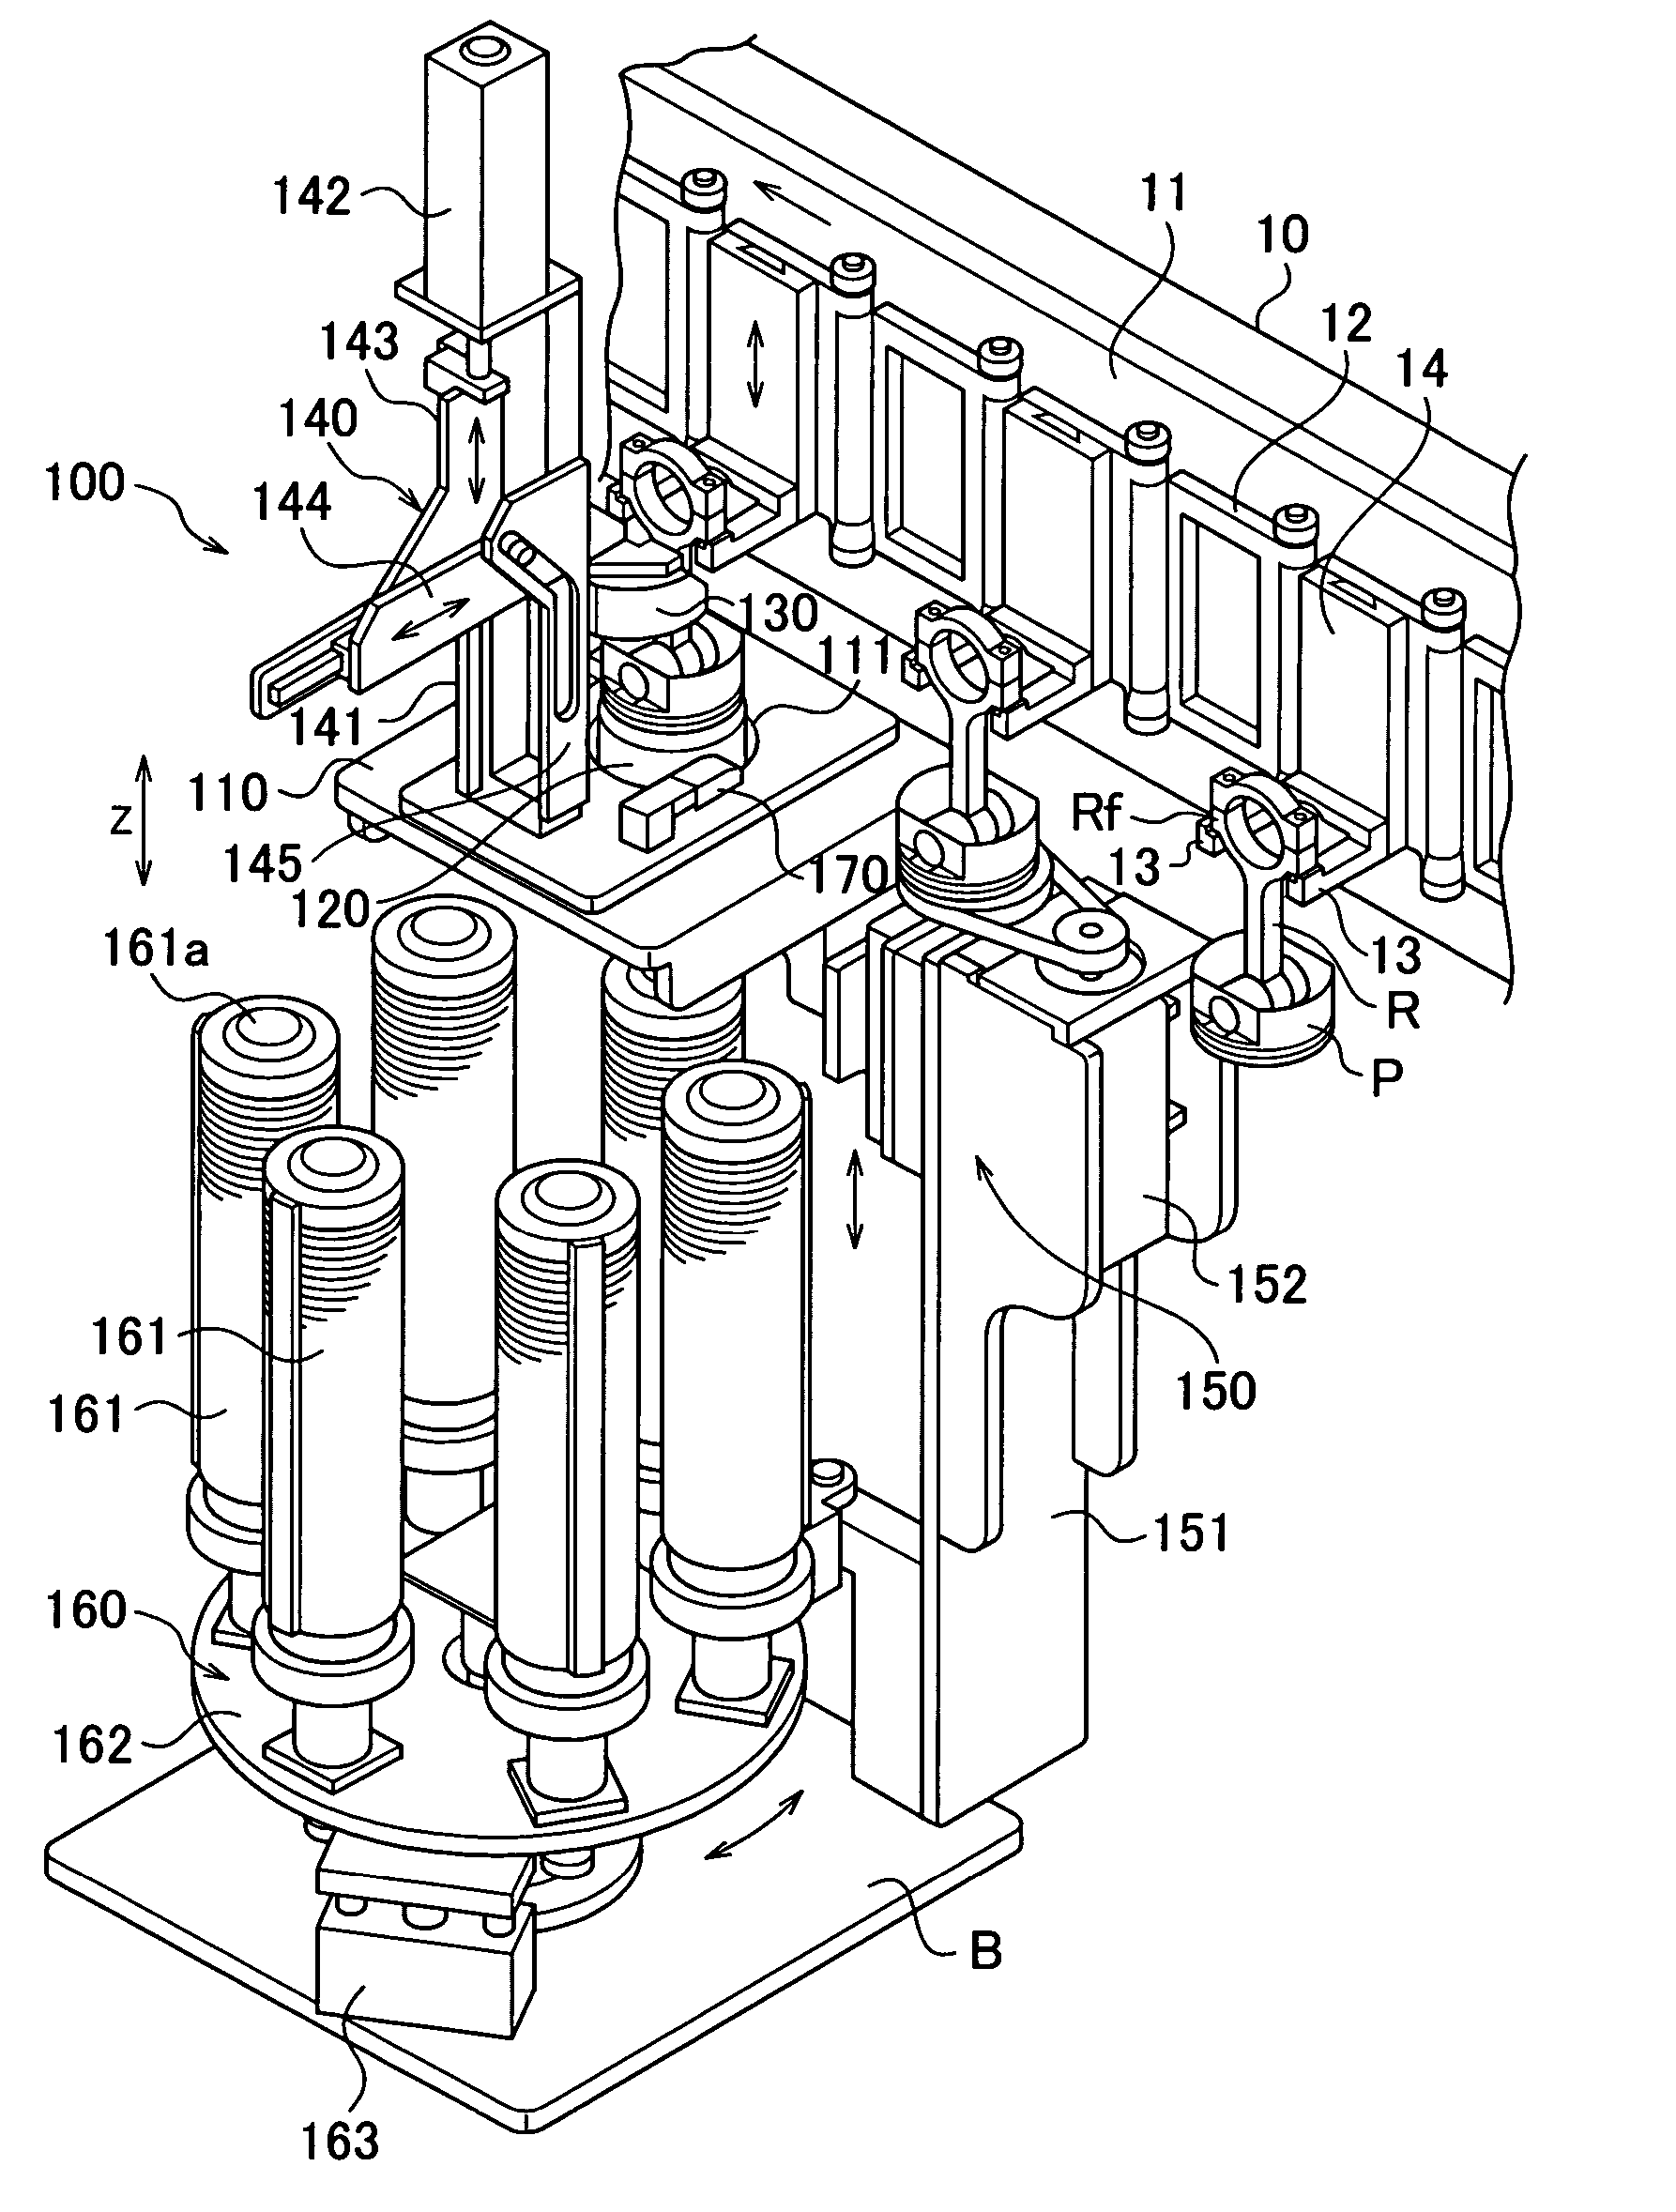 Device and method for installing piston ring